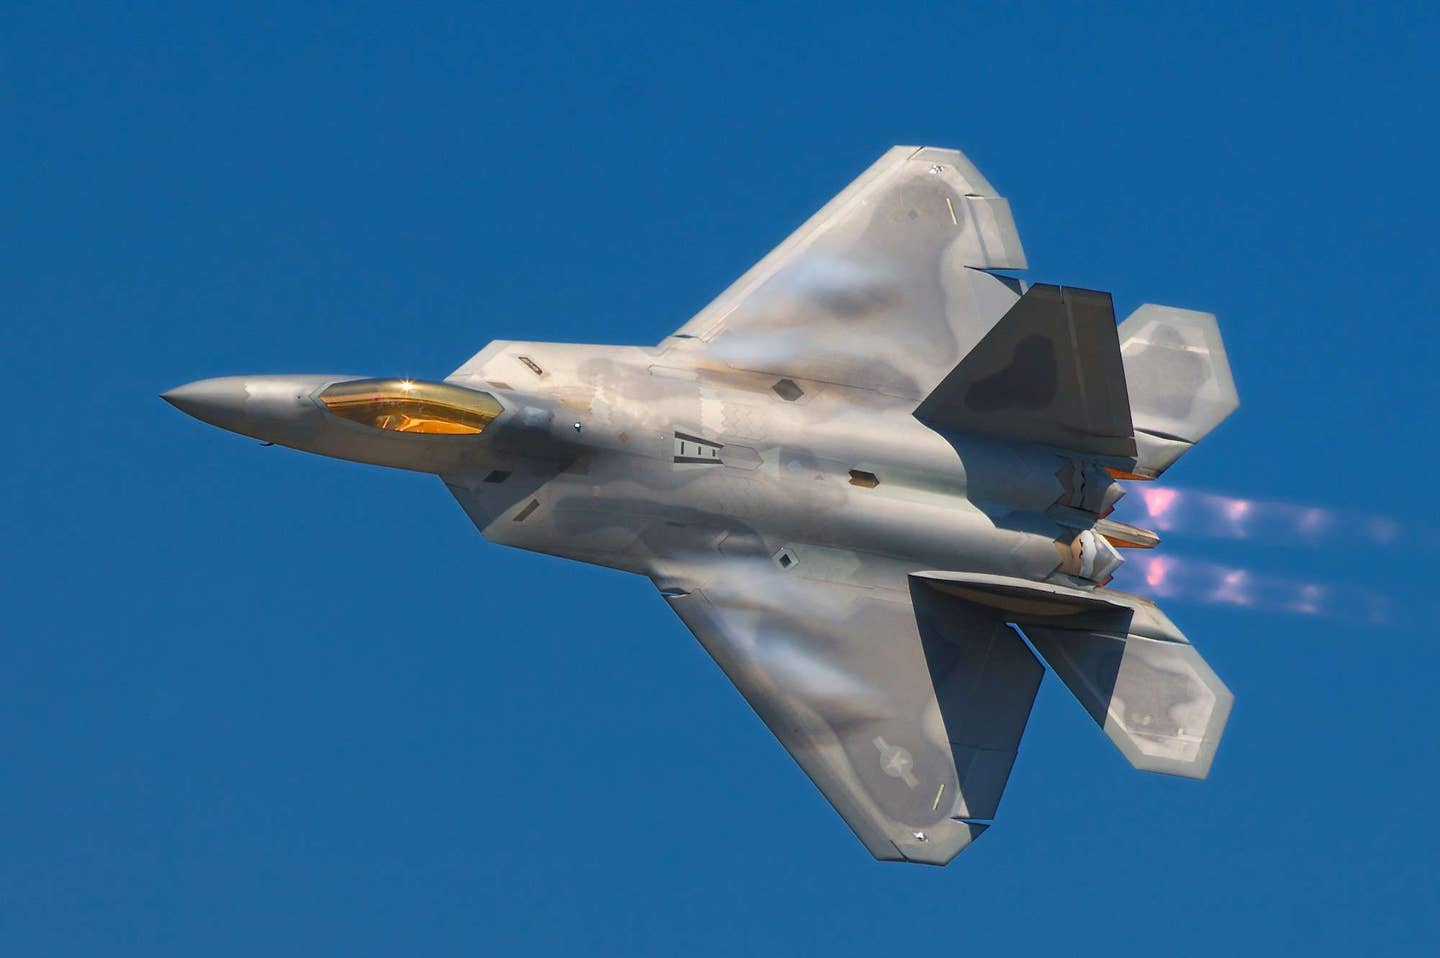 A Lockheed Martin F-22A Raptor fighter streaks by the ramp at the 2008 Joint Services Open House (JSOH) airshow at Andrews AFB. Despite many great performances most of those at the show wanted to see the latest USAF fighter. | Photo by Rob Shenk